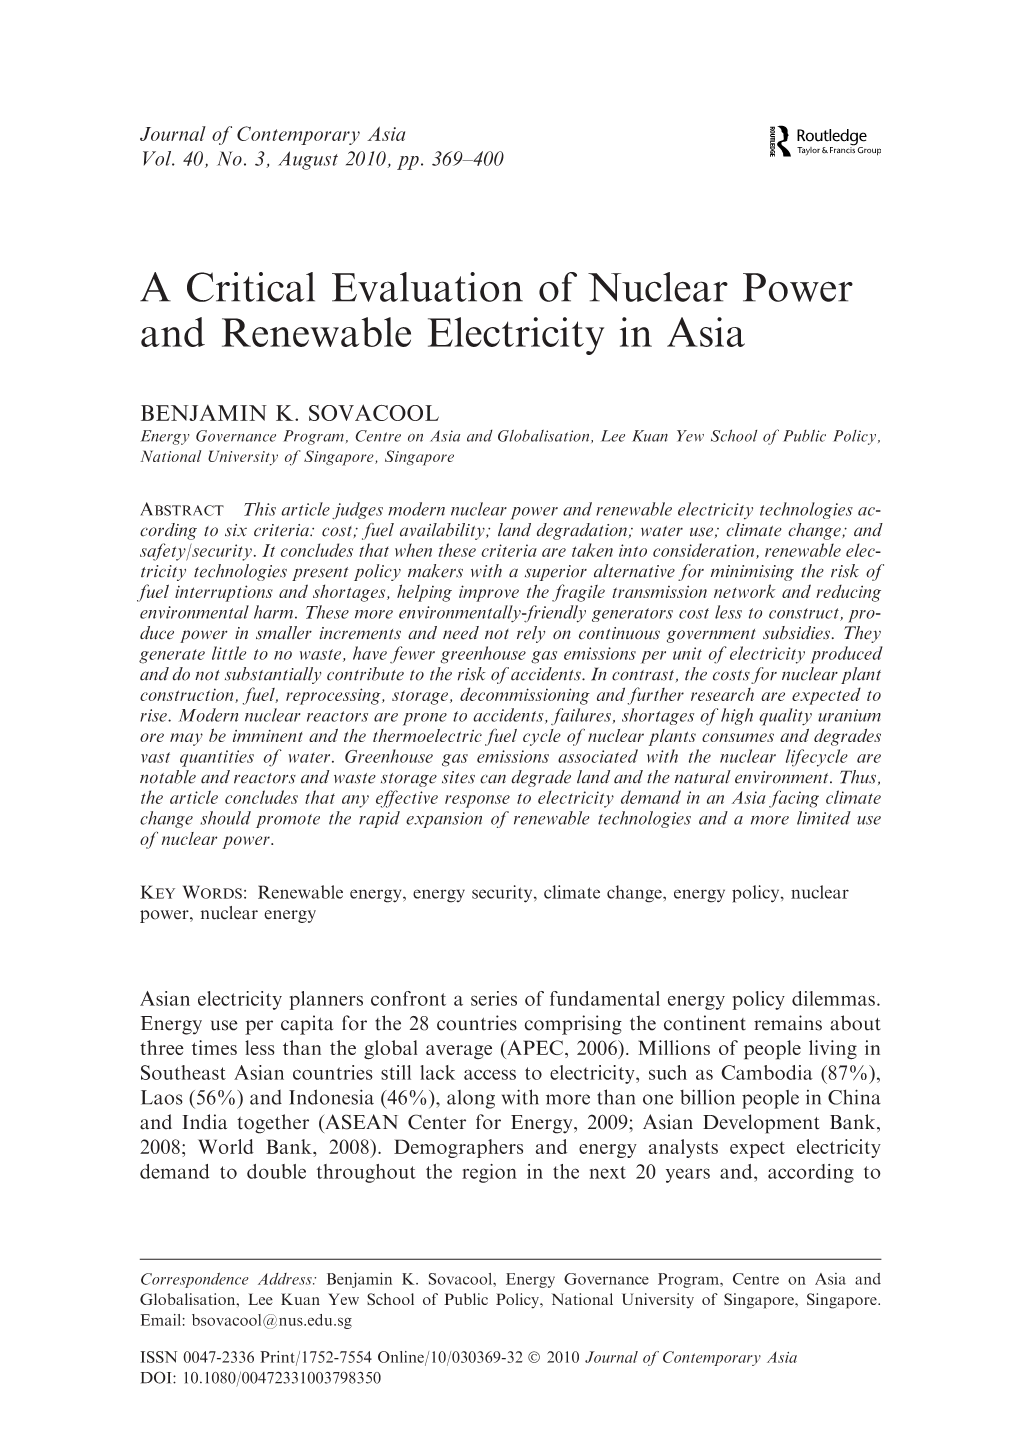 A Critical Evaluation of Nuclear Power and Renewable Electricity in Asia